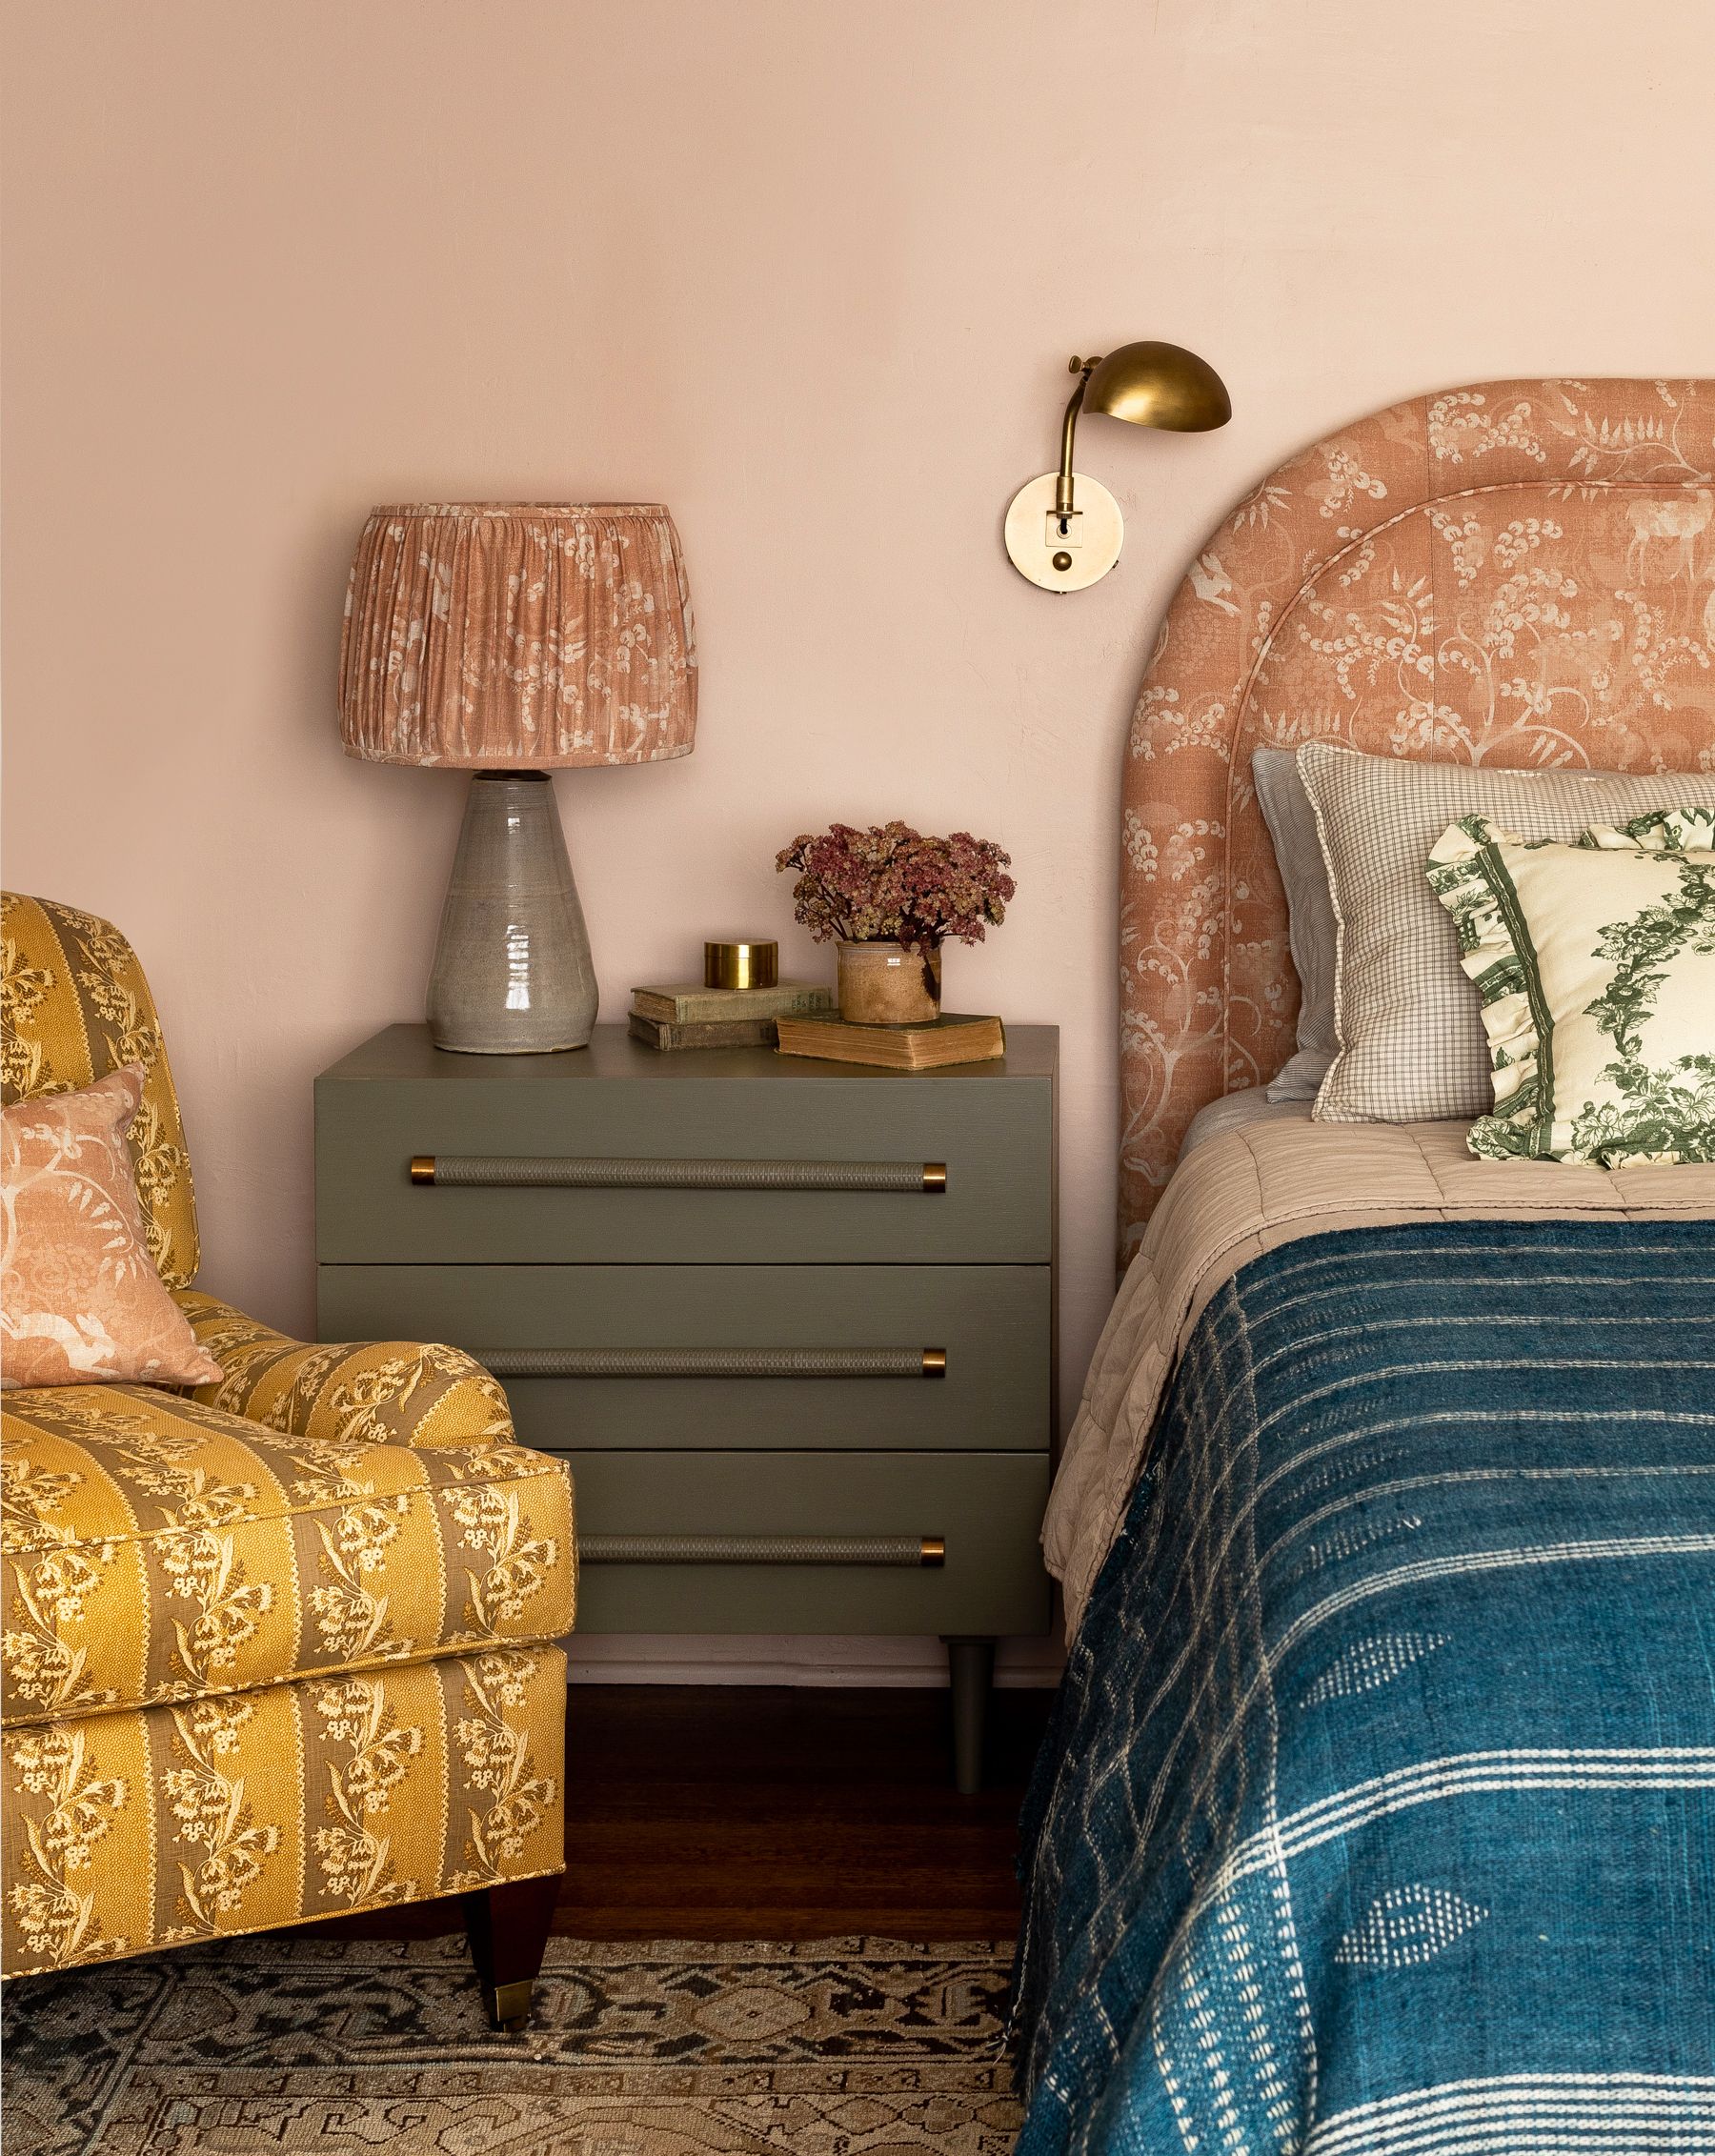 https://hips.hearstapps.com/hmg-prod/images/alternative-bedside-table-ideas-heidi-caillier-design-seattle-interior-designer-pink-walls-master-bedroom-yellow-printed-chair-blue-blanket-bed-british-layered-print-mixing-1572284573.jpg